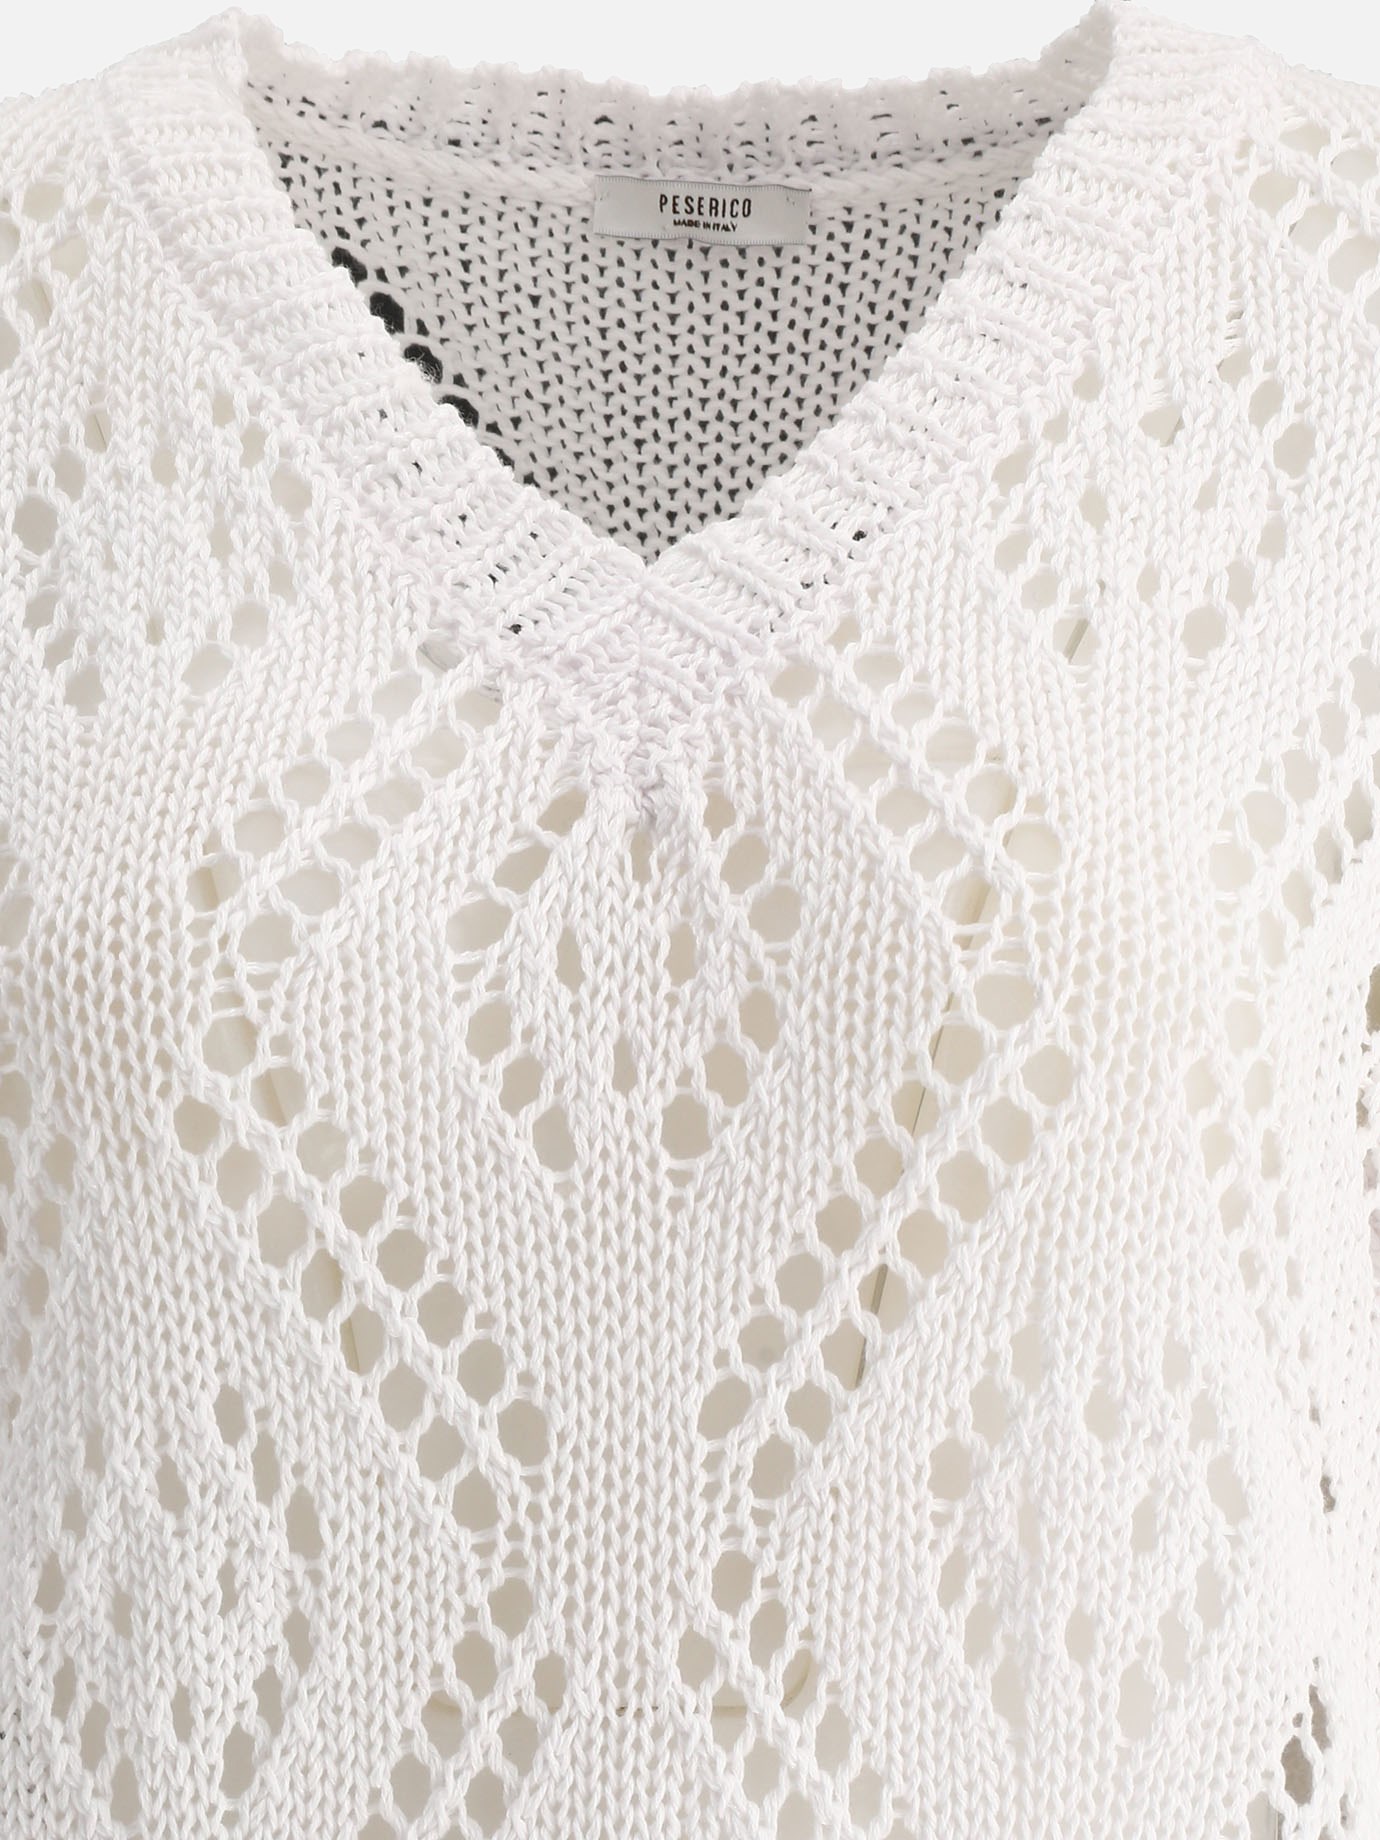 Openwork sweater by Peserico